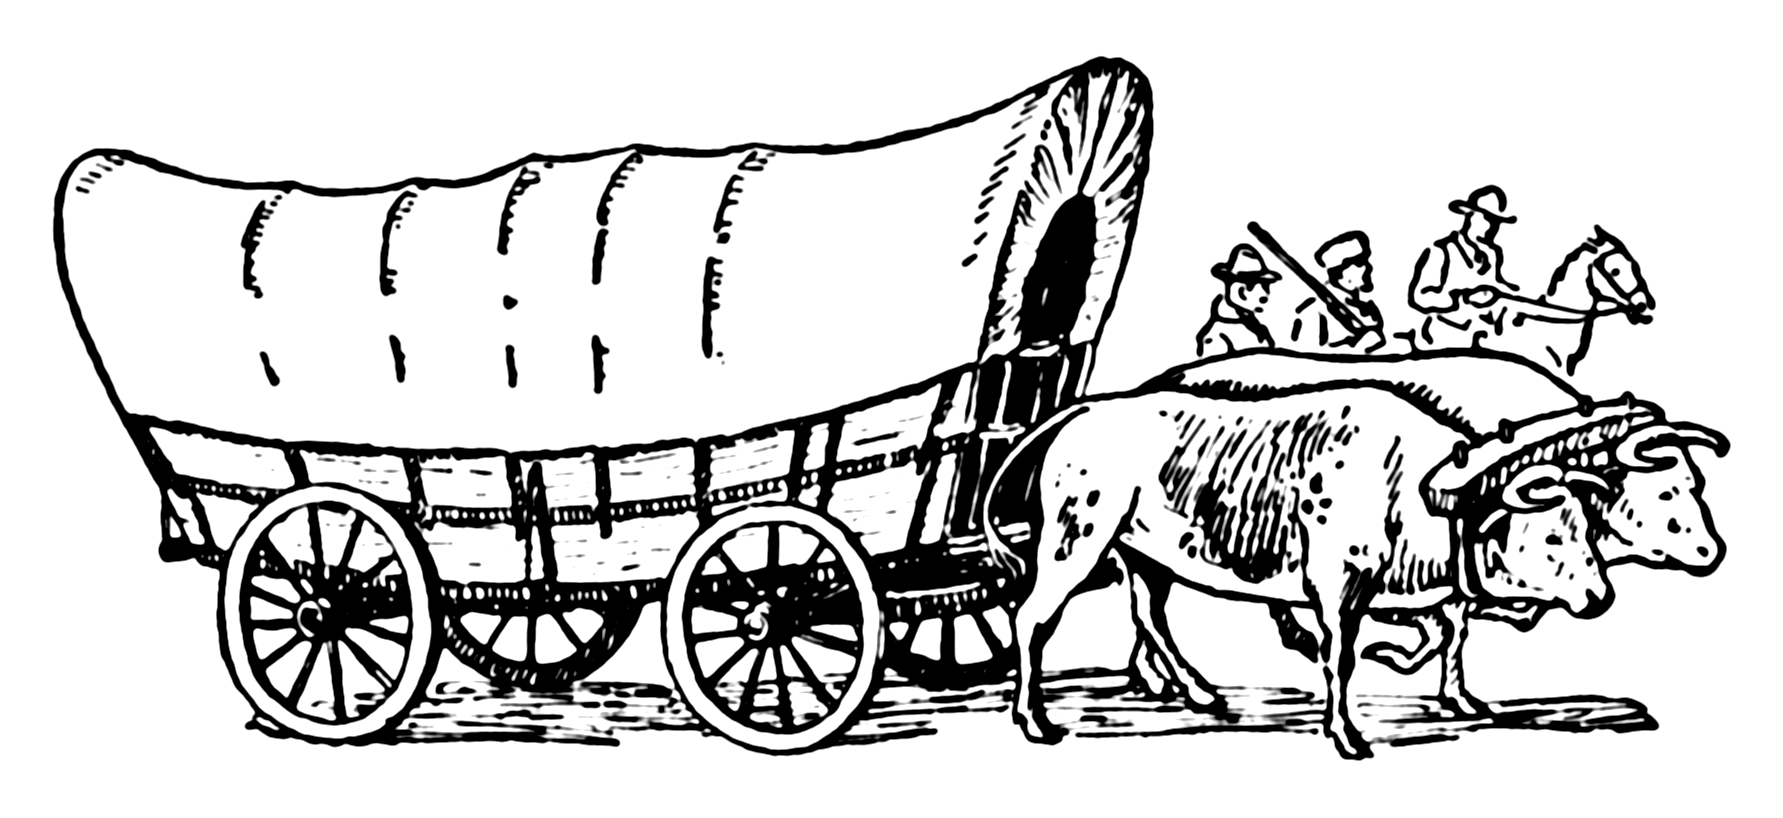 covered-wagon-drawing-wikimedia-commons